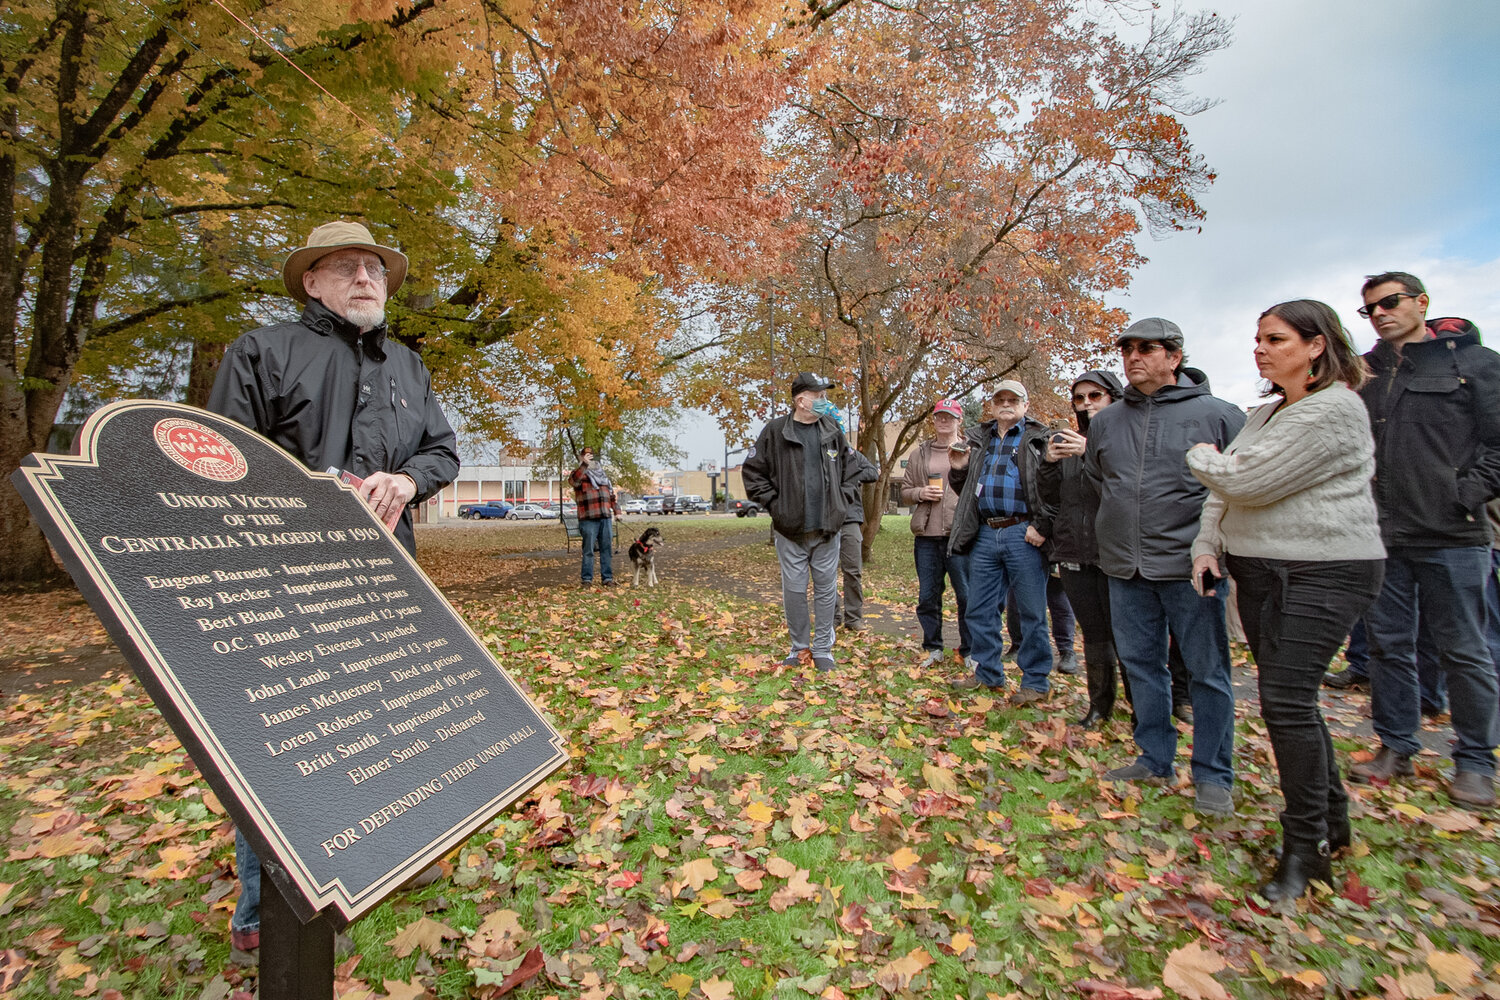 IWW member Phil Reichel delivers a speech for the new bronze plaque in Centralia's George Washington Park dedicated on Saturday, Nov. 11, to the IWW union victims of the Centralia Tragedy of 1919.